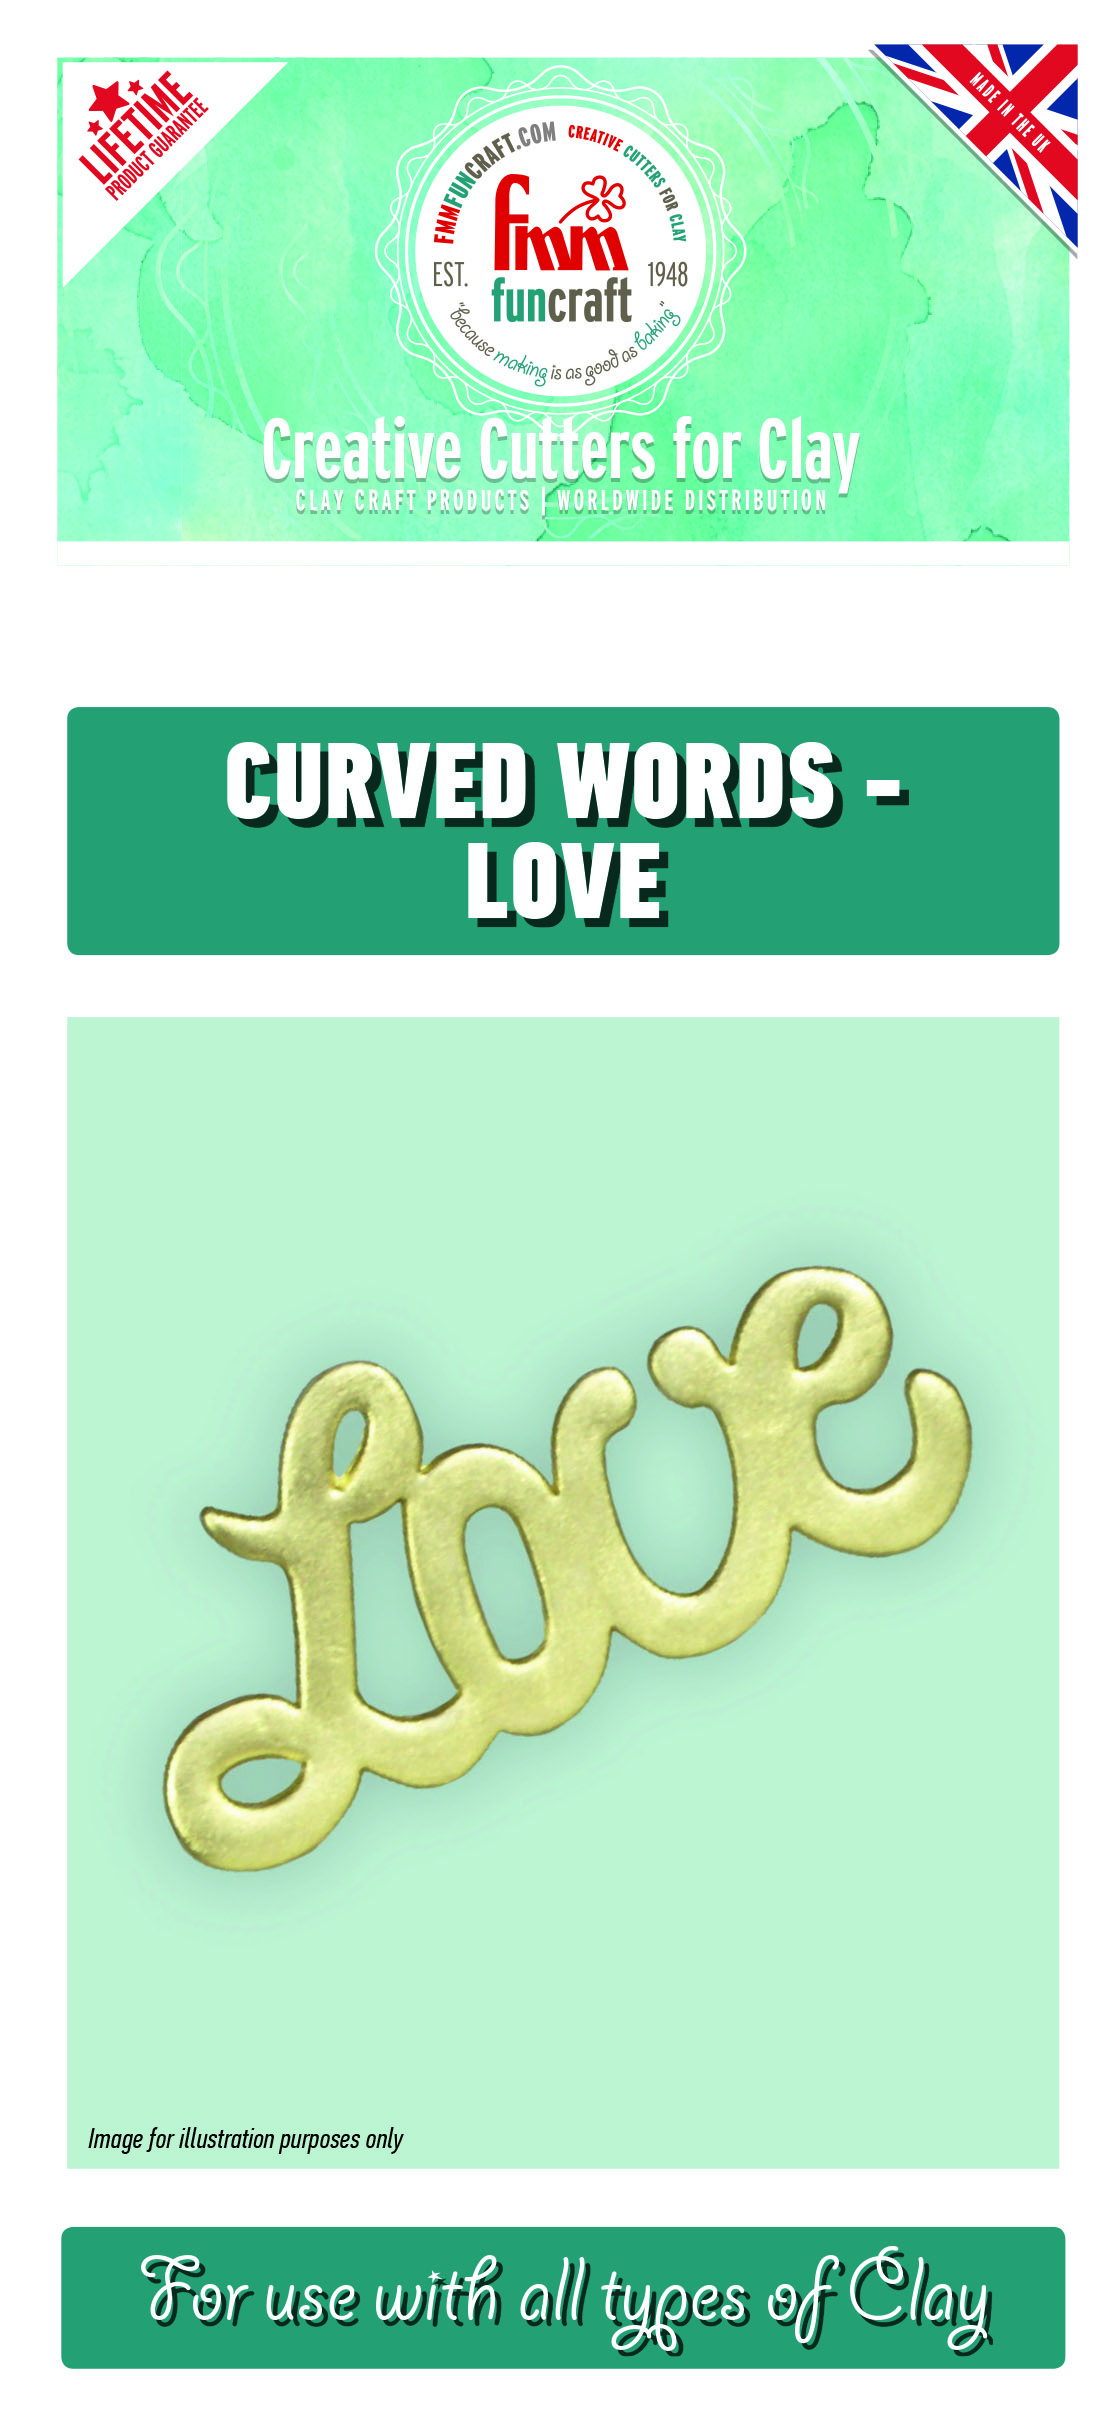 FMM Funcraft Curved Words - Love